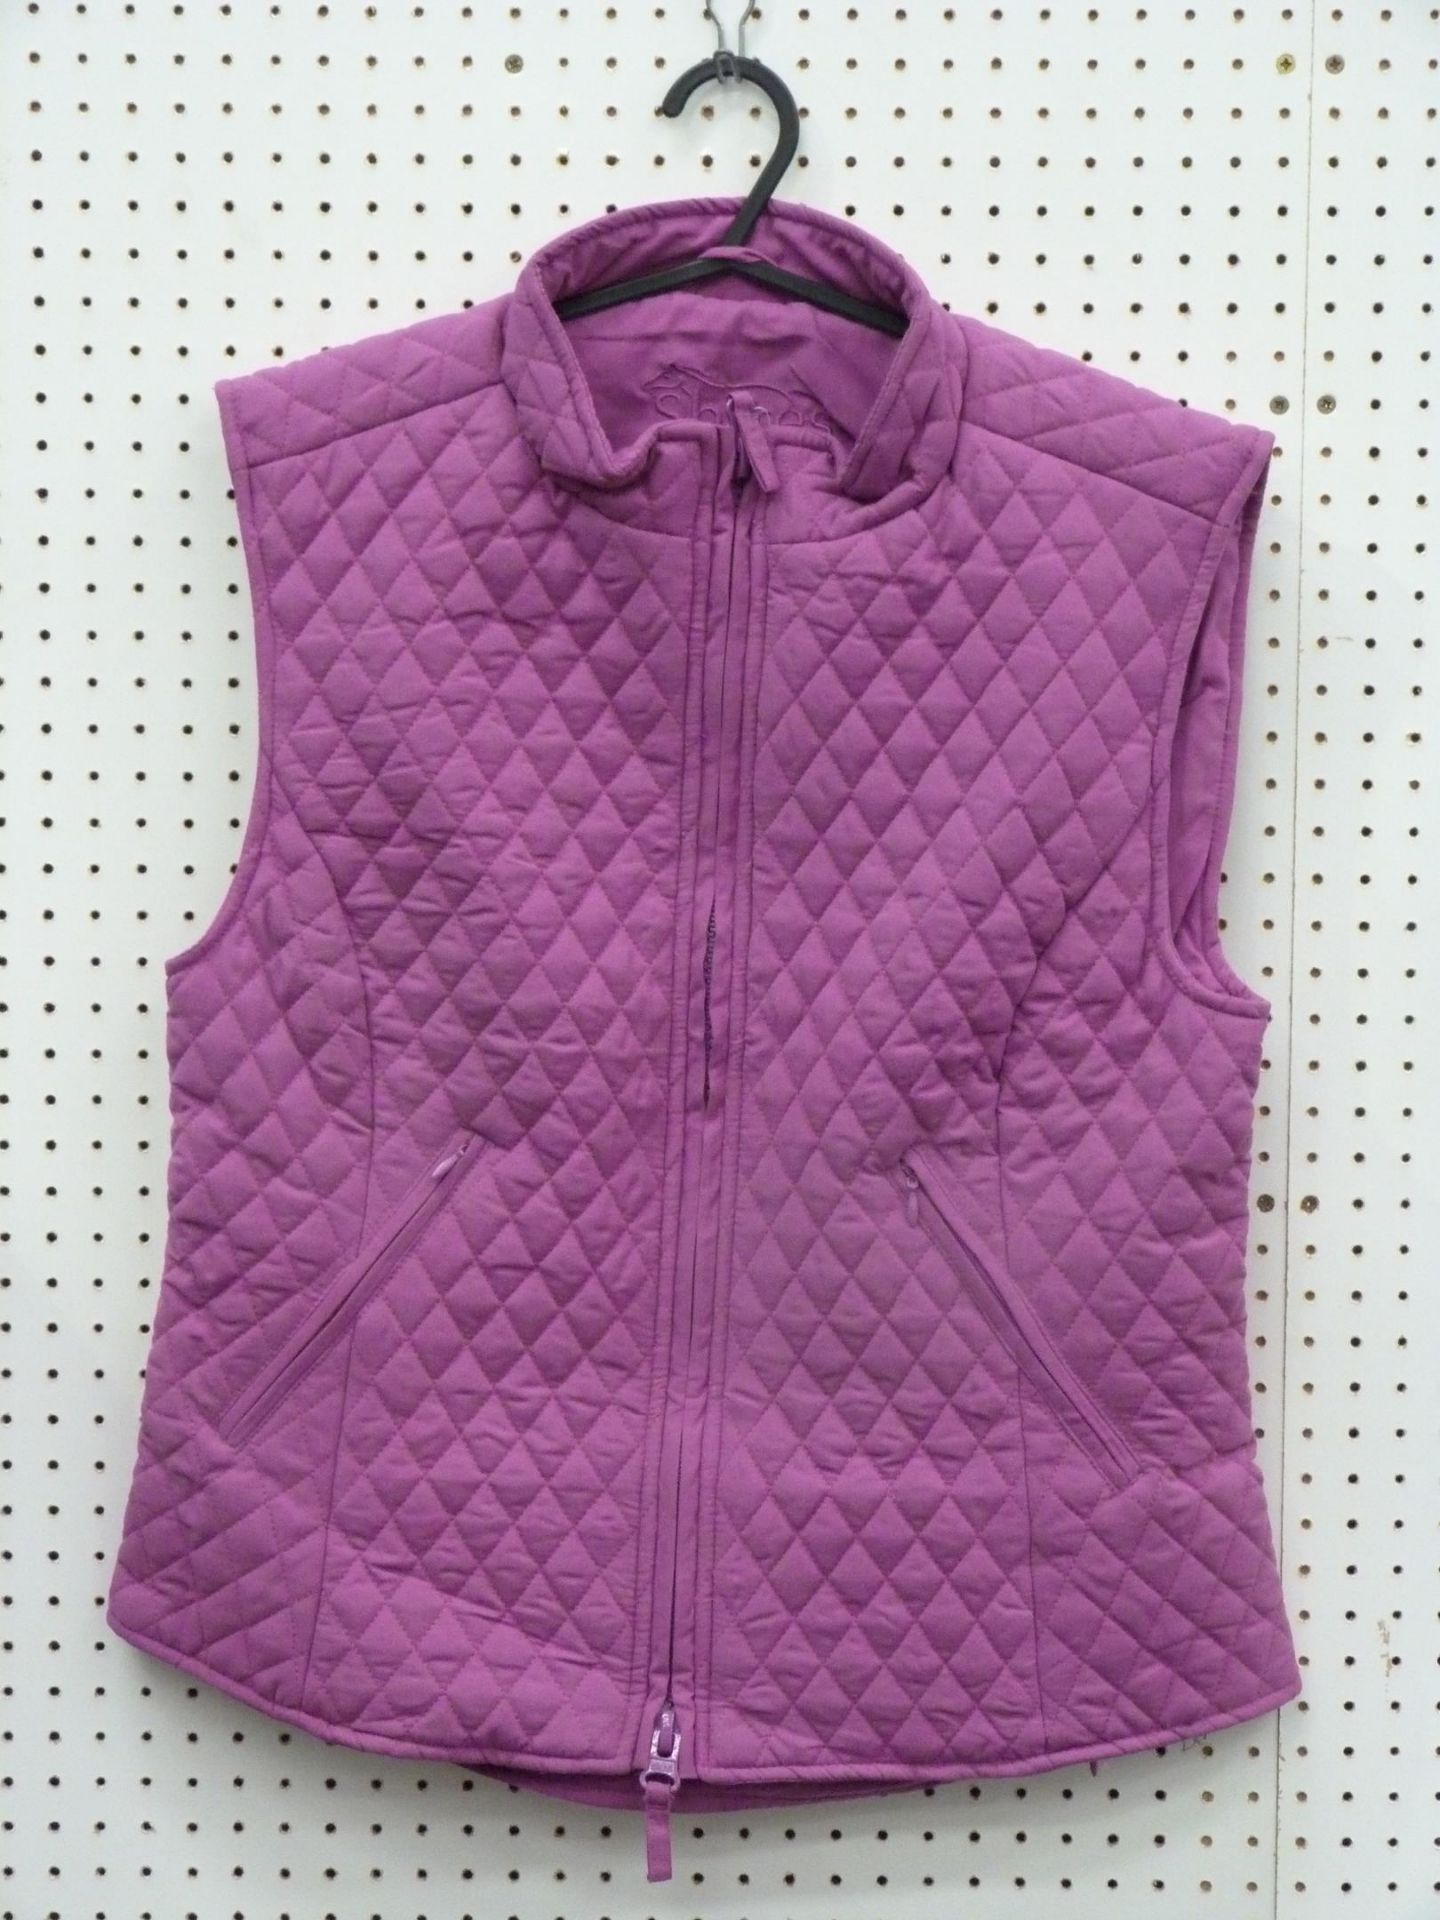 * Four Dark Pink, New Shires Waistcoats, two Medium, one Large, one X Large. RRP £119.95 (4)